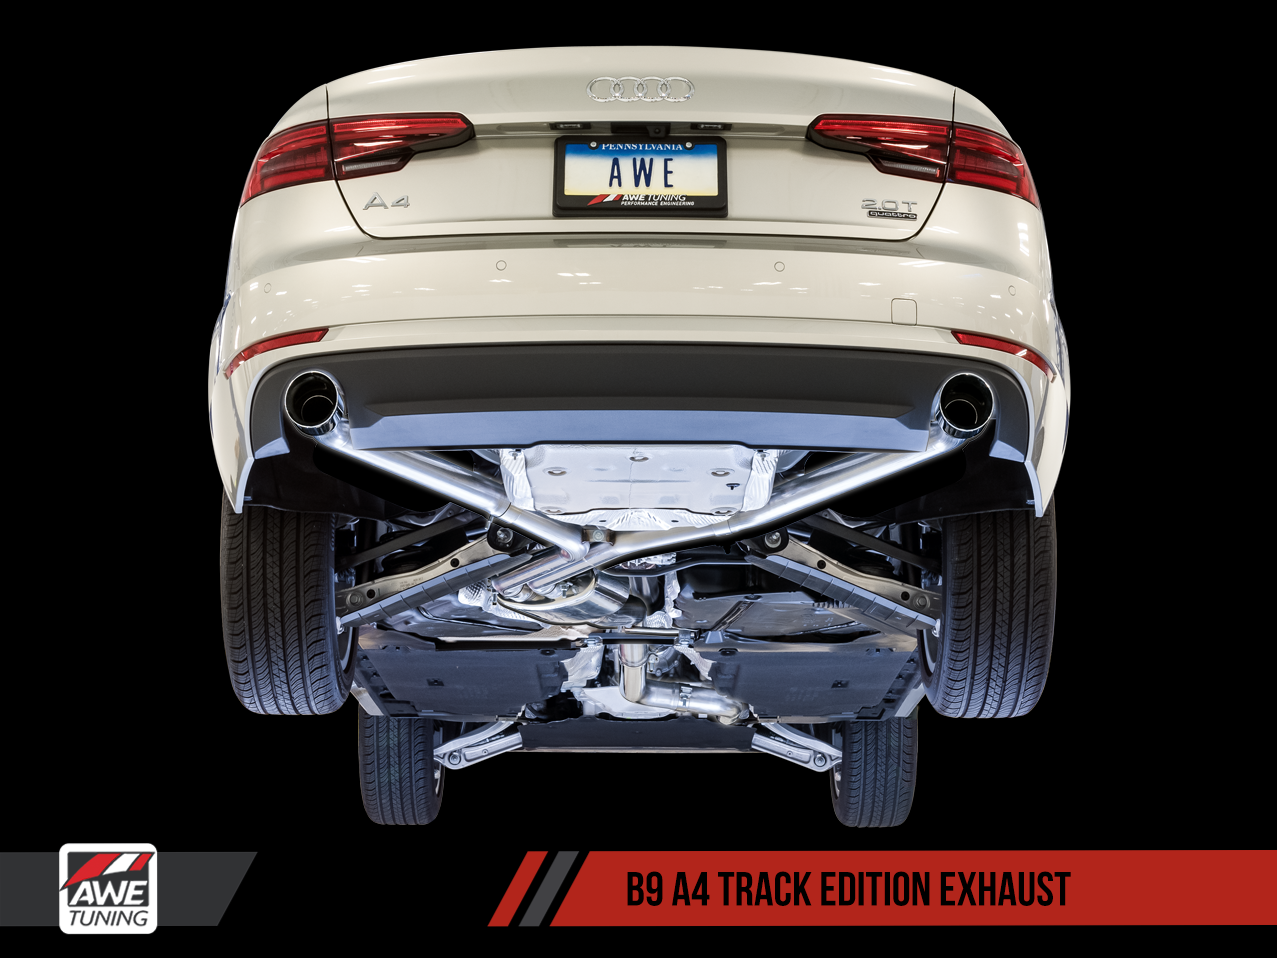 AWE Track Edition Exhaust for B9 A4, Dual Outlet - Chrome Silver Tips (includes DP)